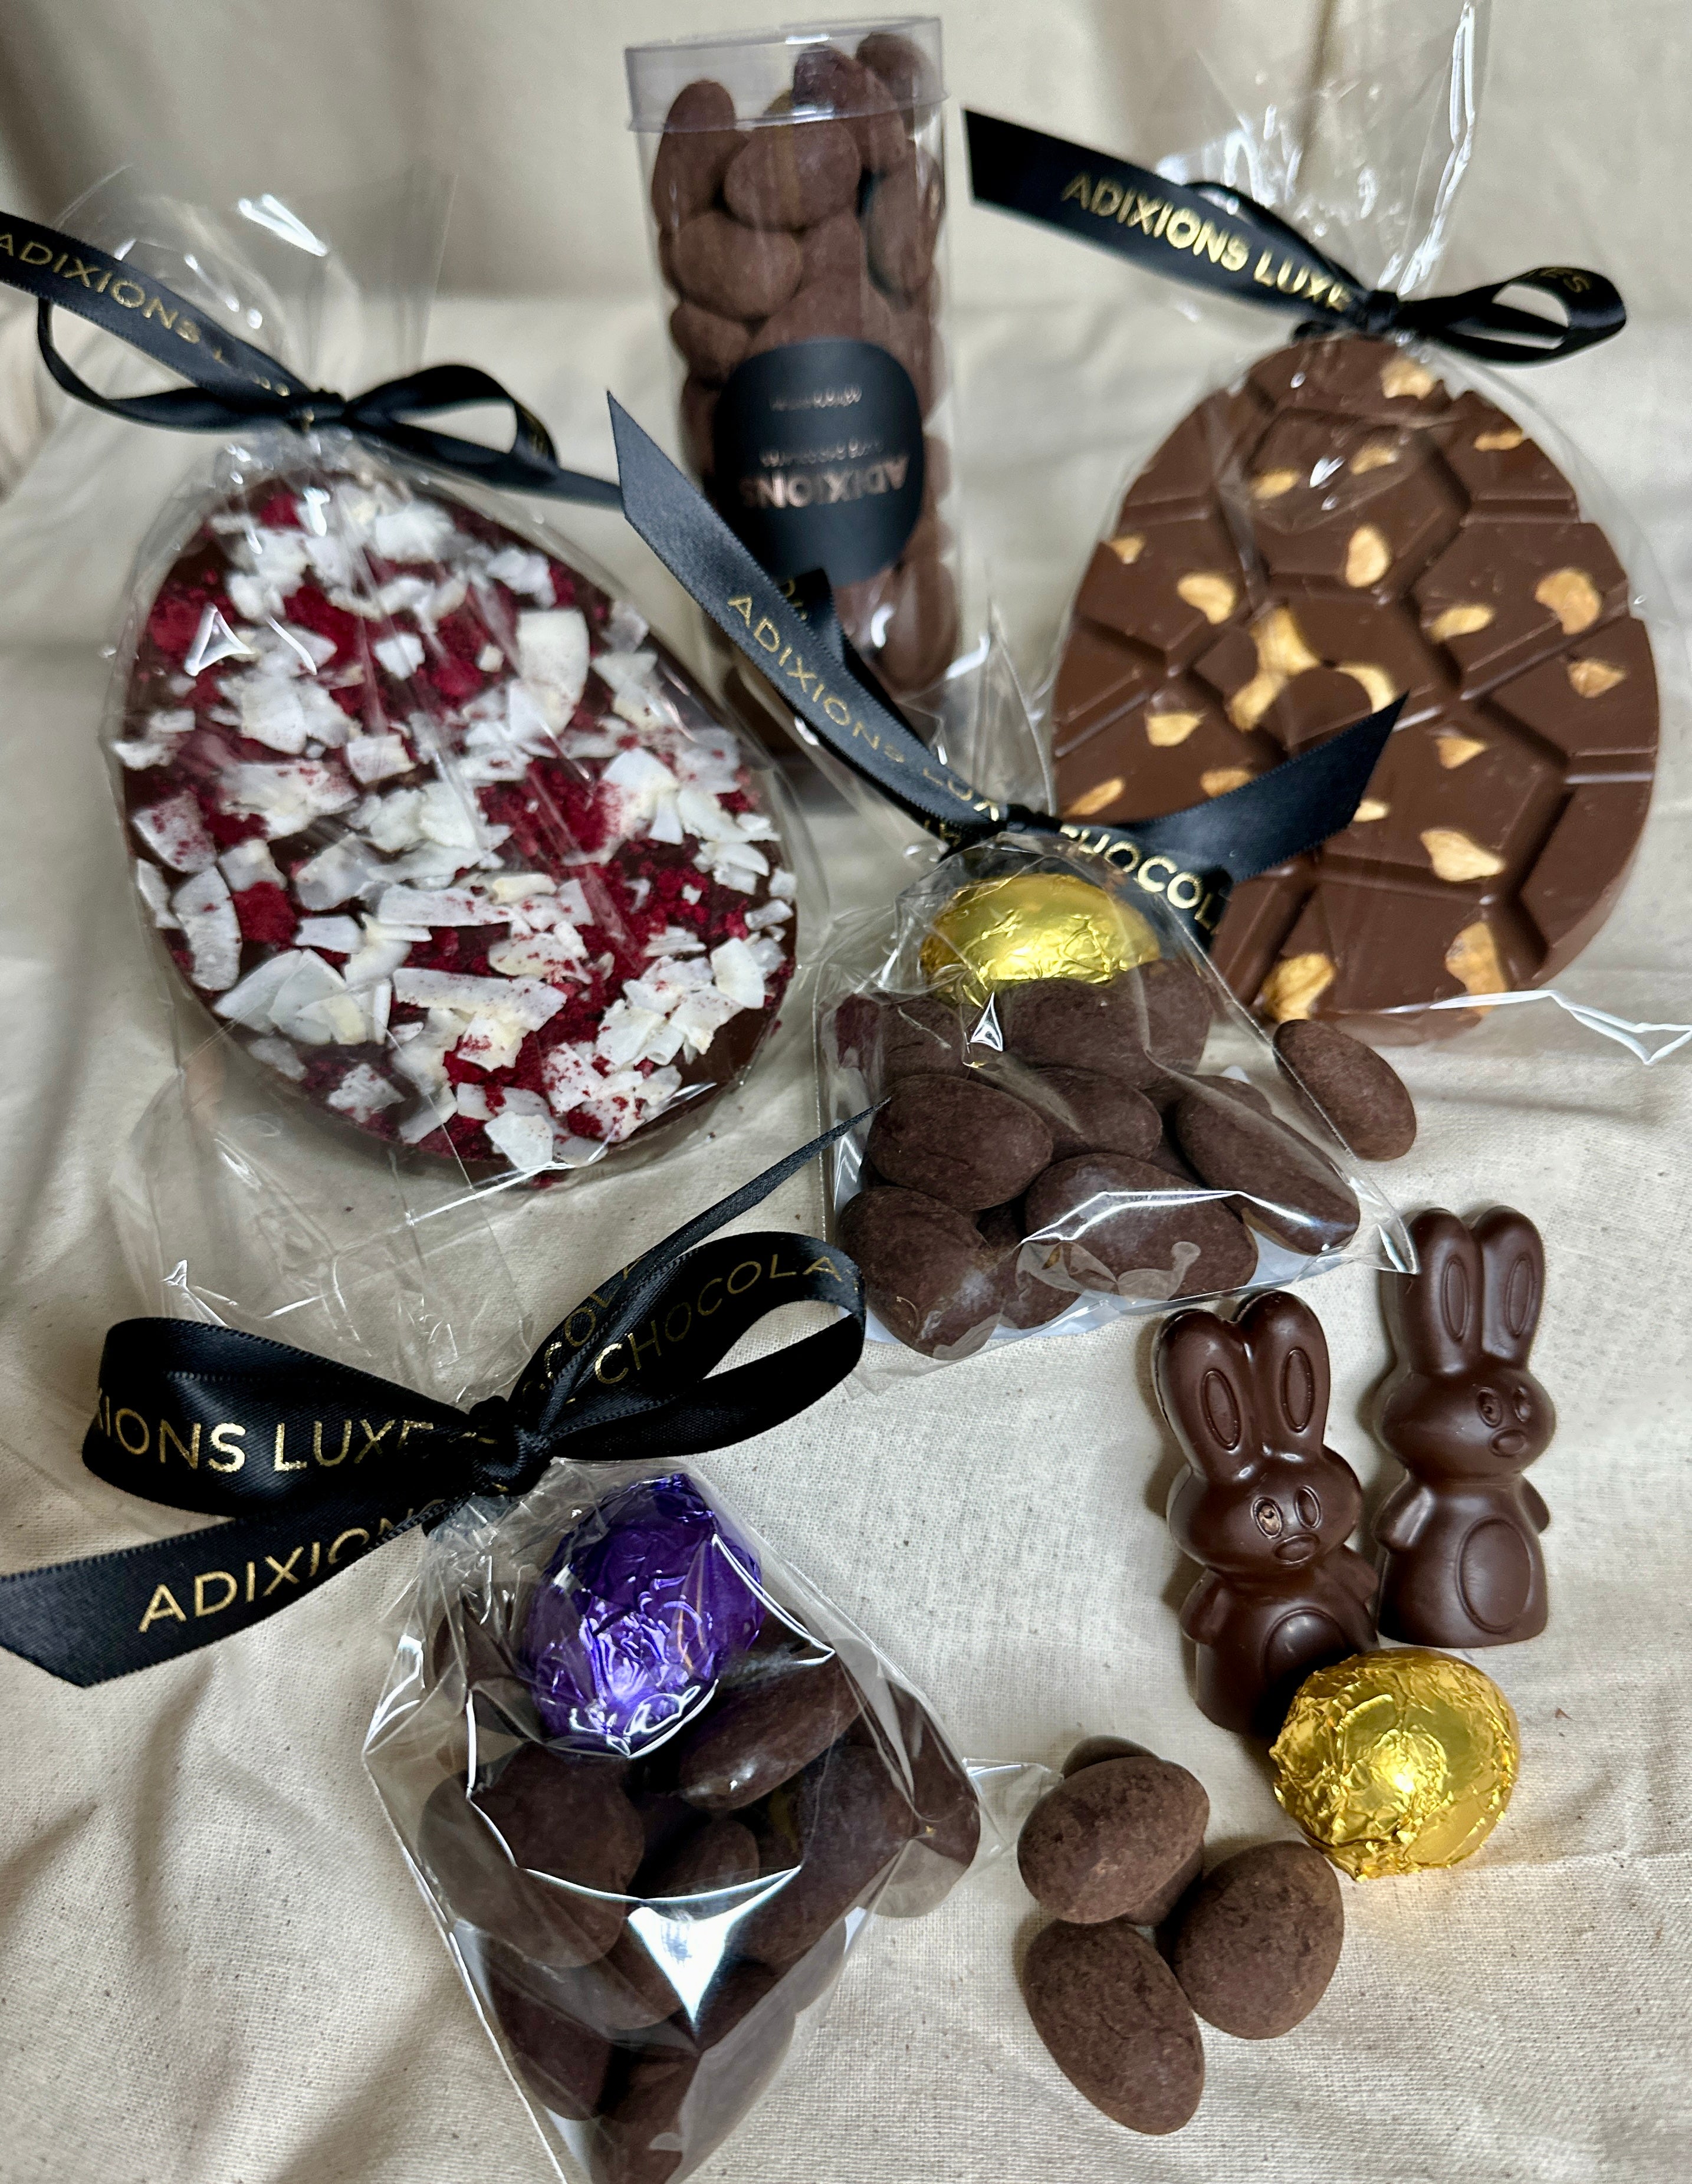 Easter Chocolate by Adixions